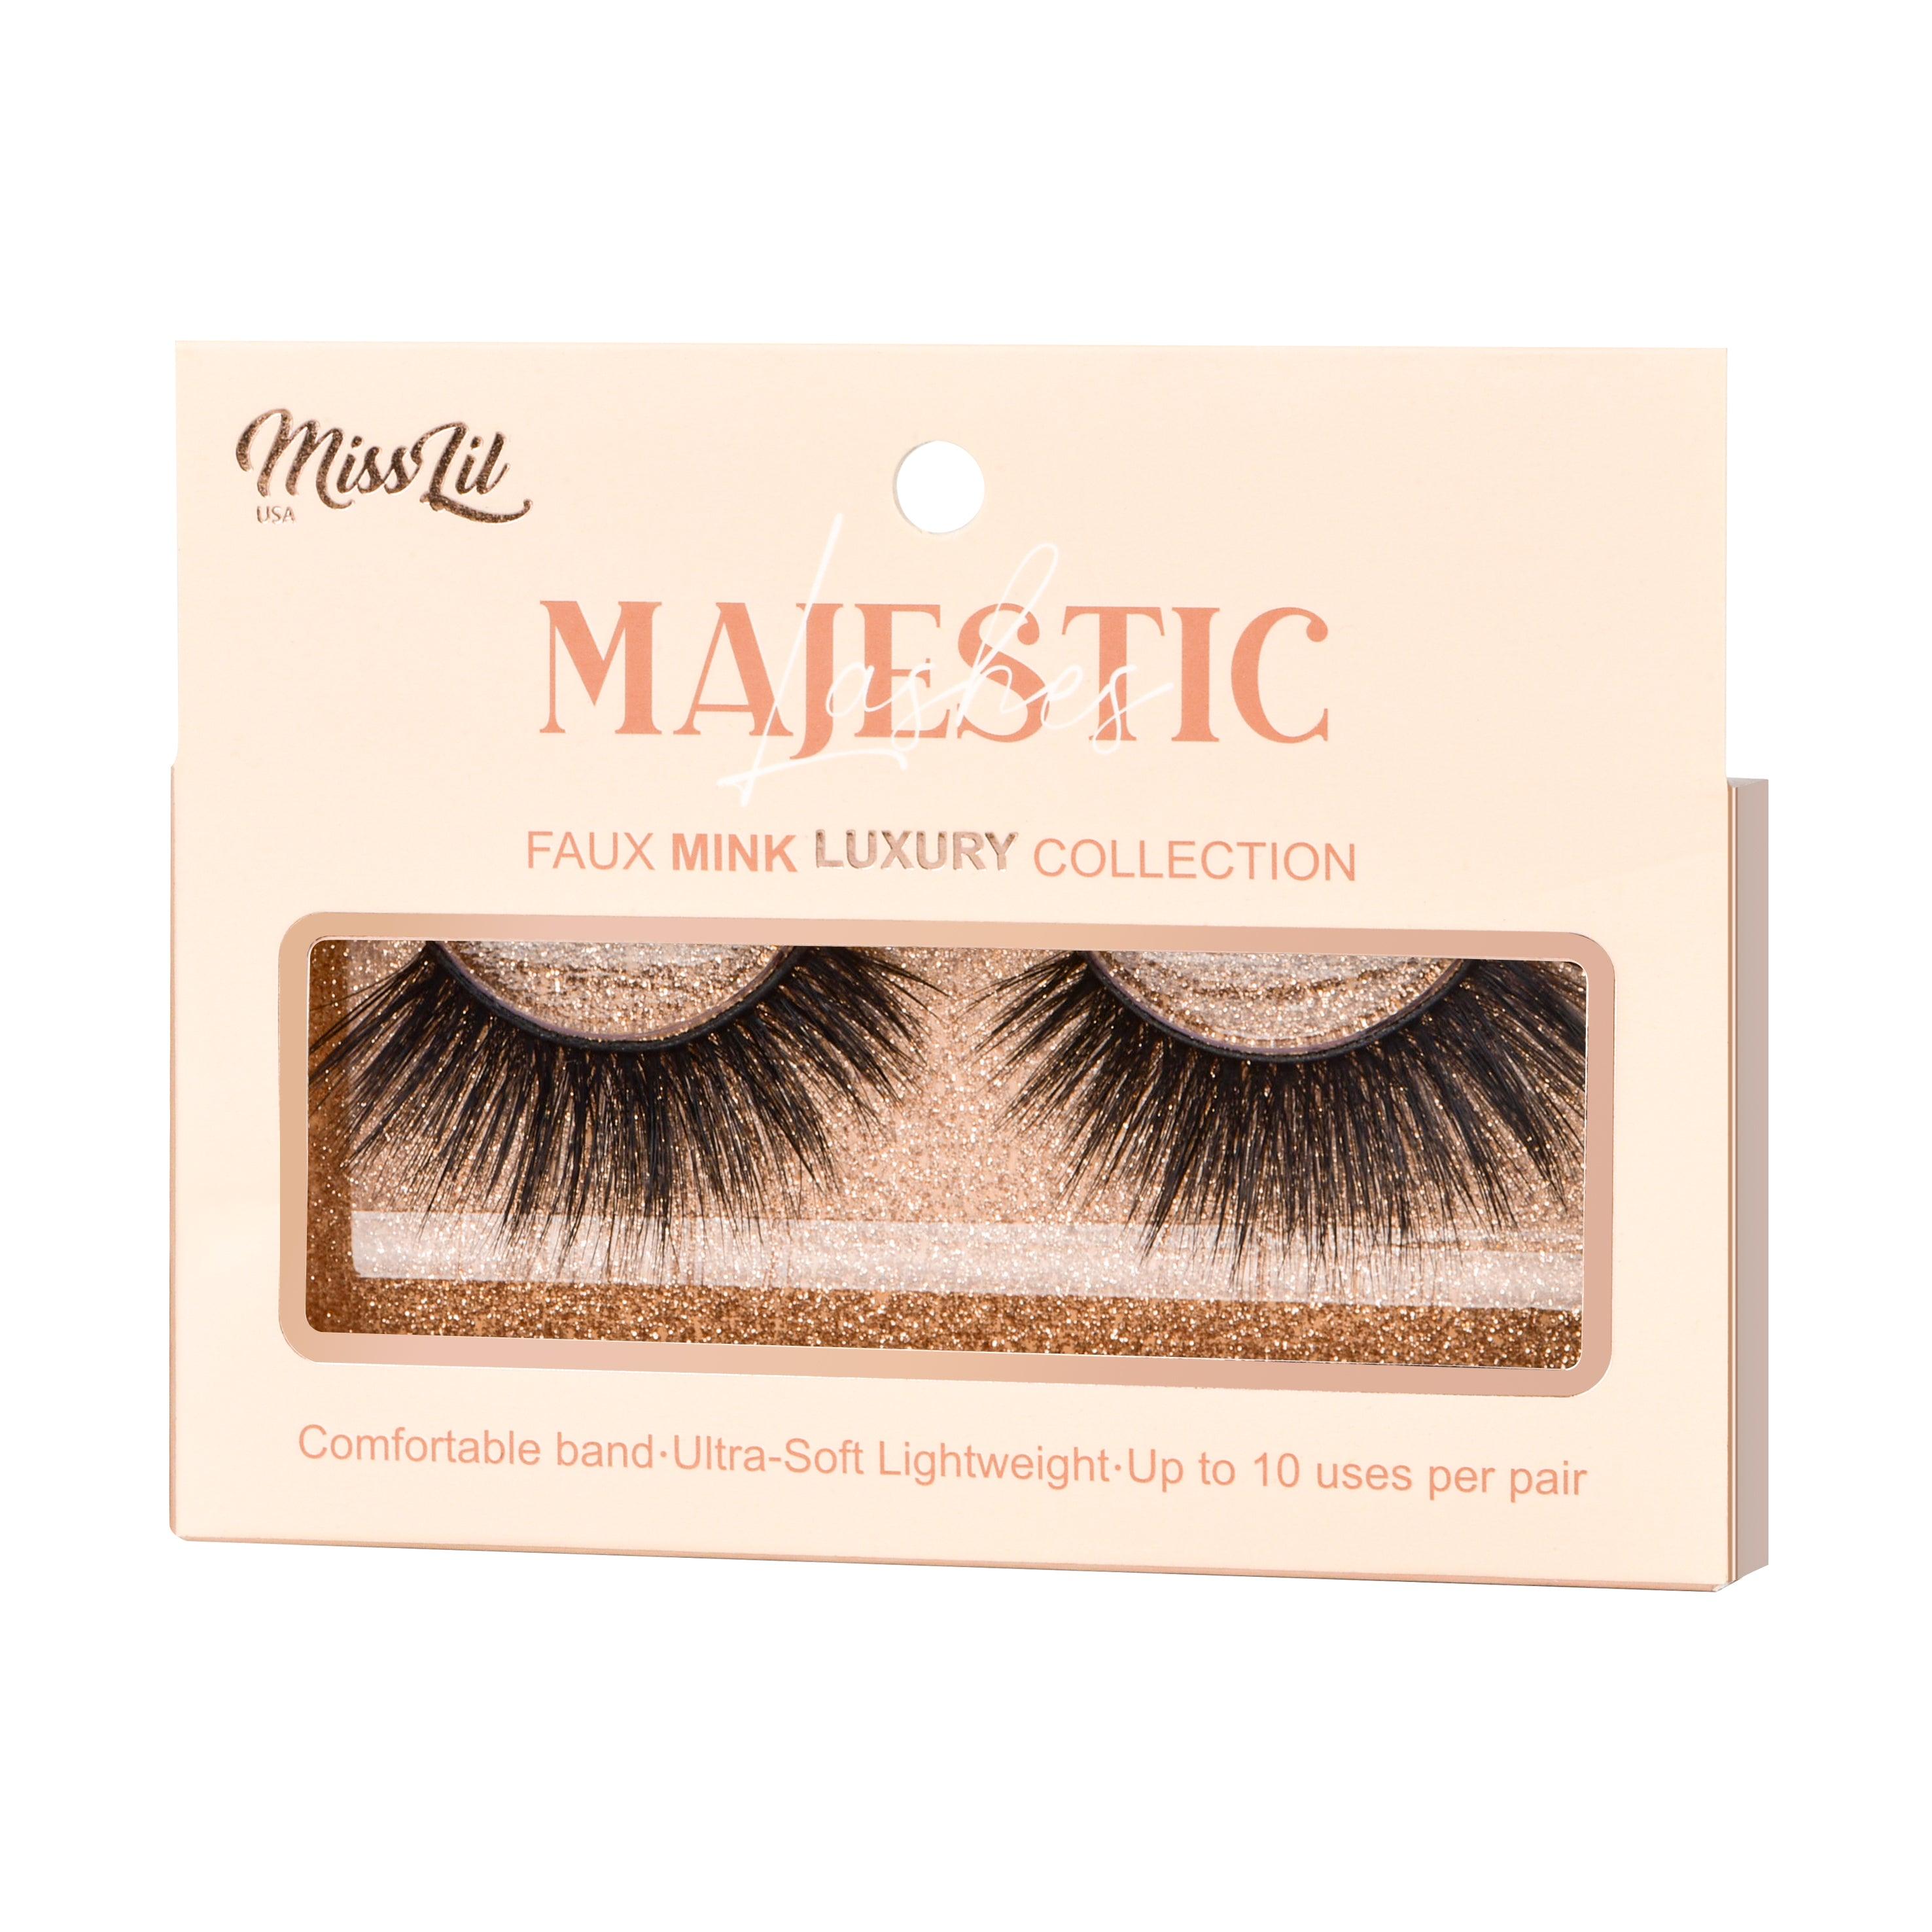 1-PAIR LASHES-MAJESTIC COLLECTION #29 (PACK OF 3) - Miss Lil USA